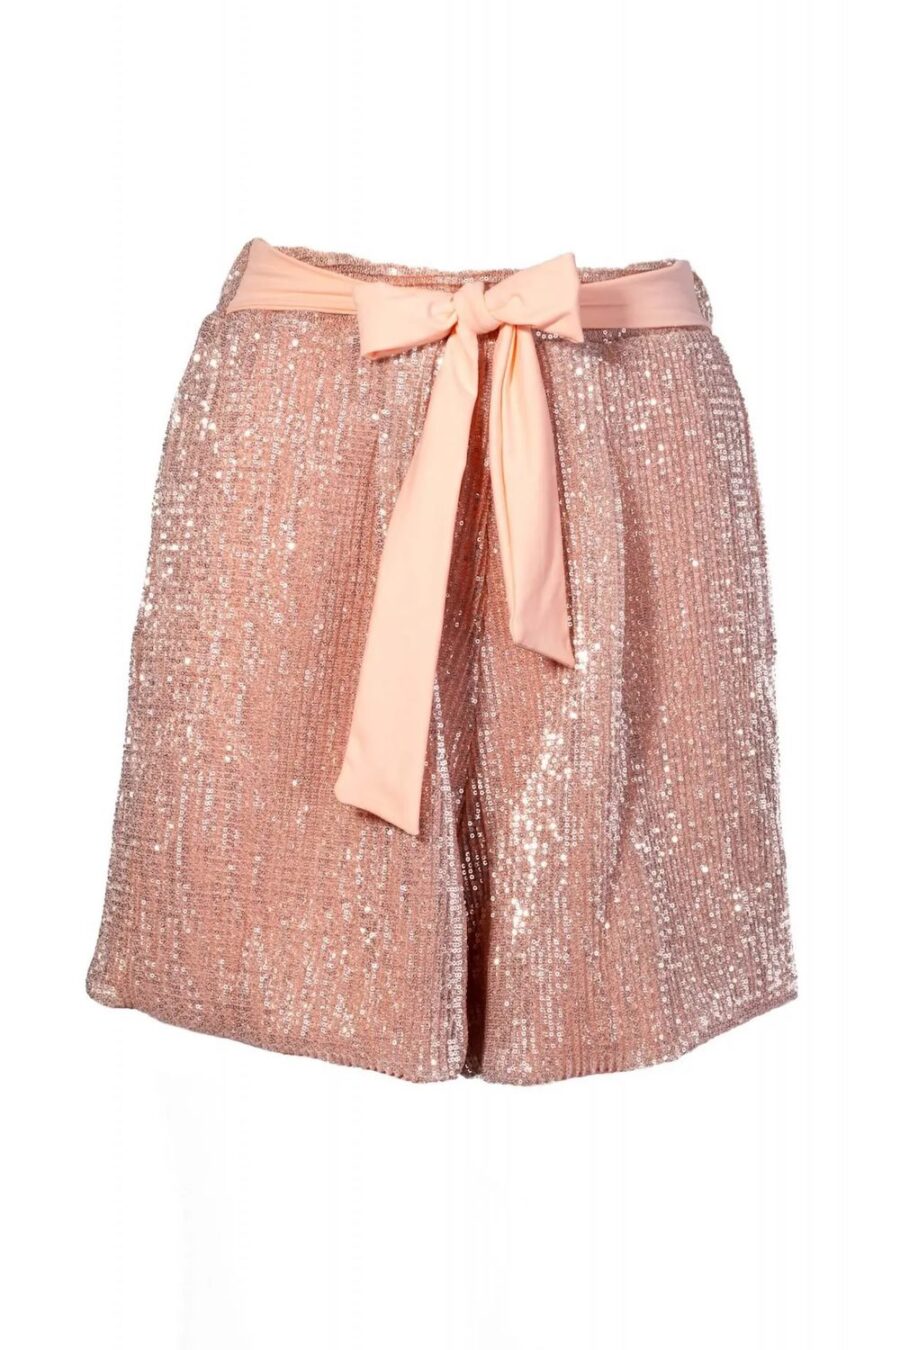 shorts darling sequin salmone fronte